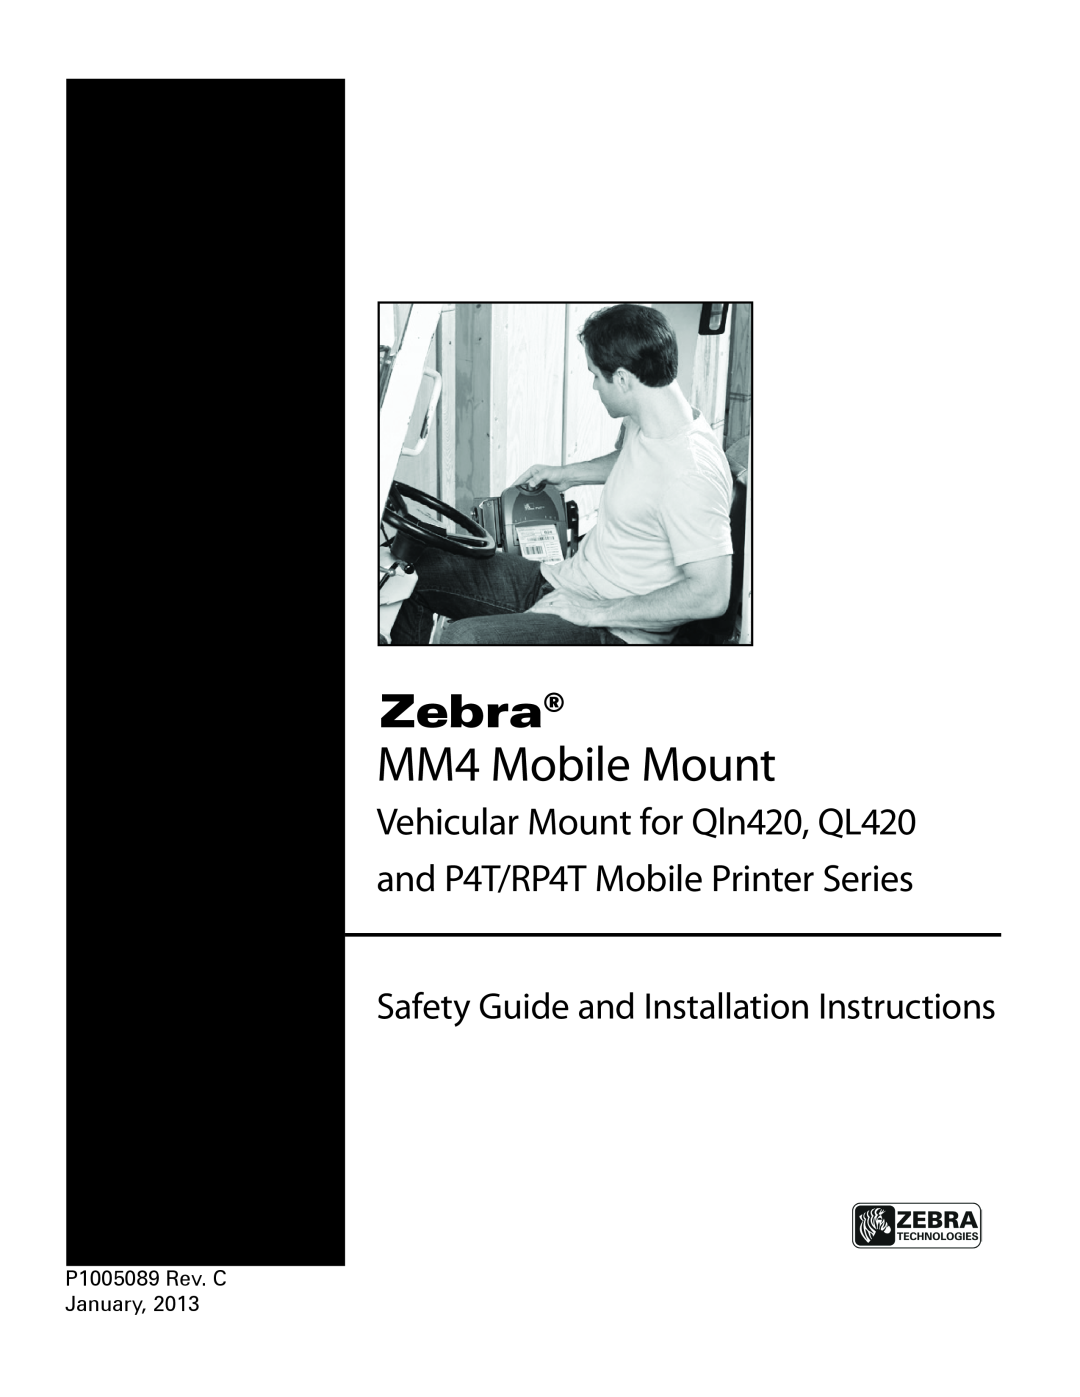 Zebra Technologies RP4T installation instructions MM4 Mobile Mount, Zebra, Safety guide and Installation Instructions 